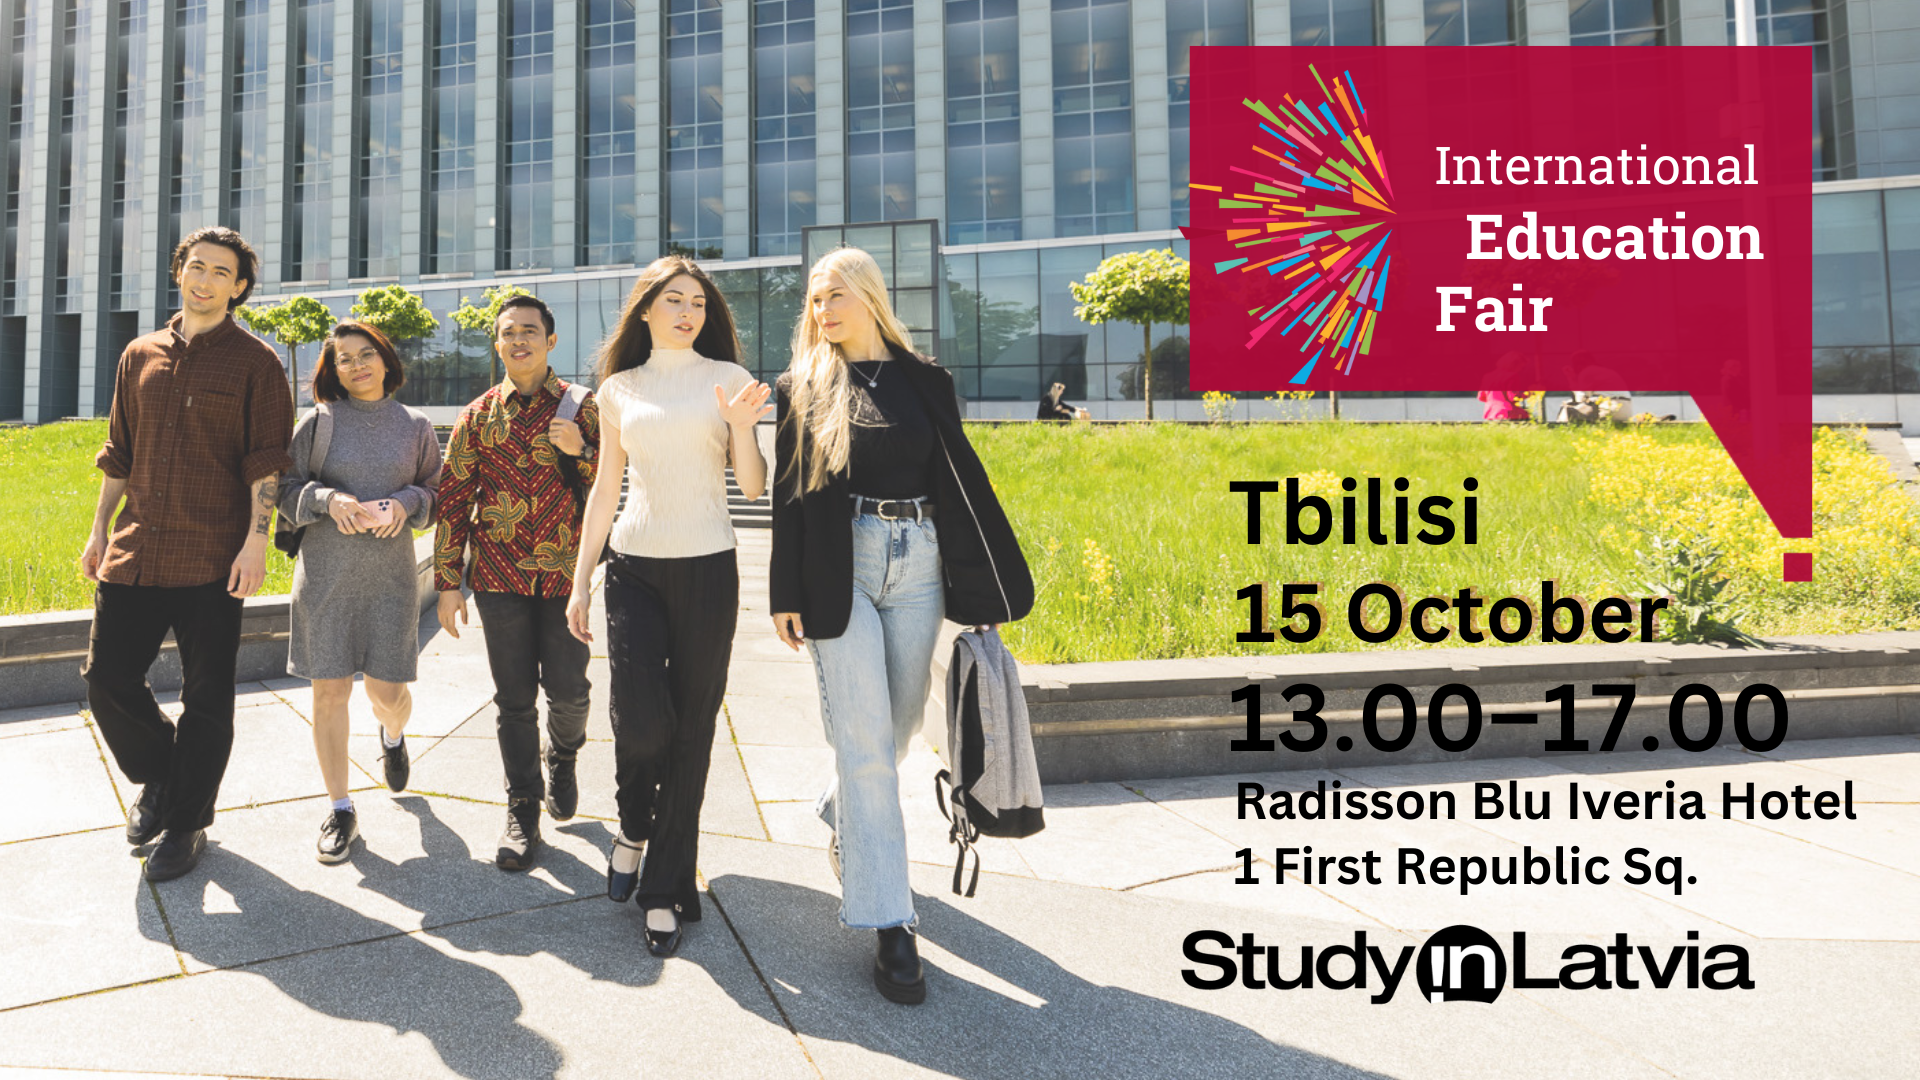 Join the biggest International Education fair in Georgia (Tbilisi) to Study in Latvia!